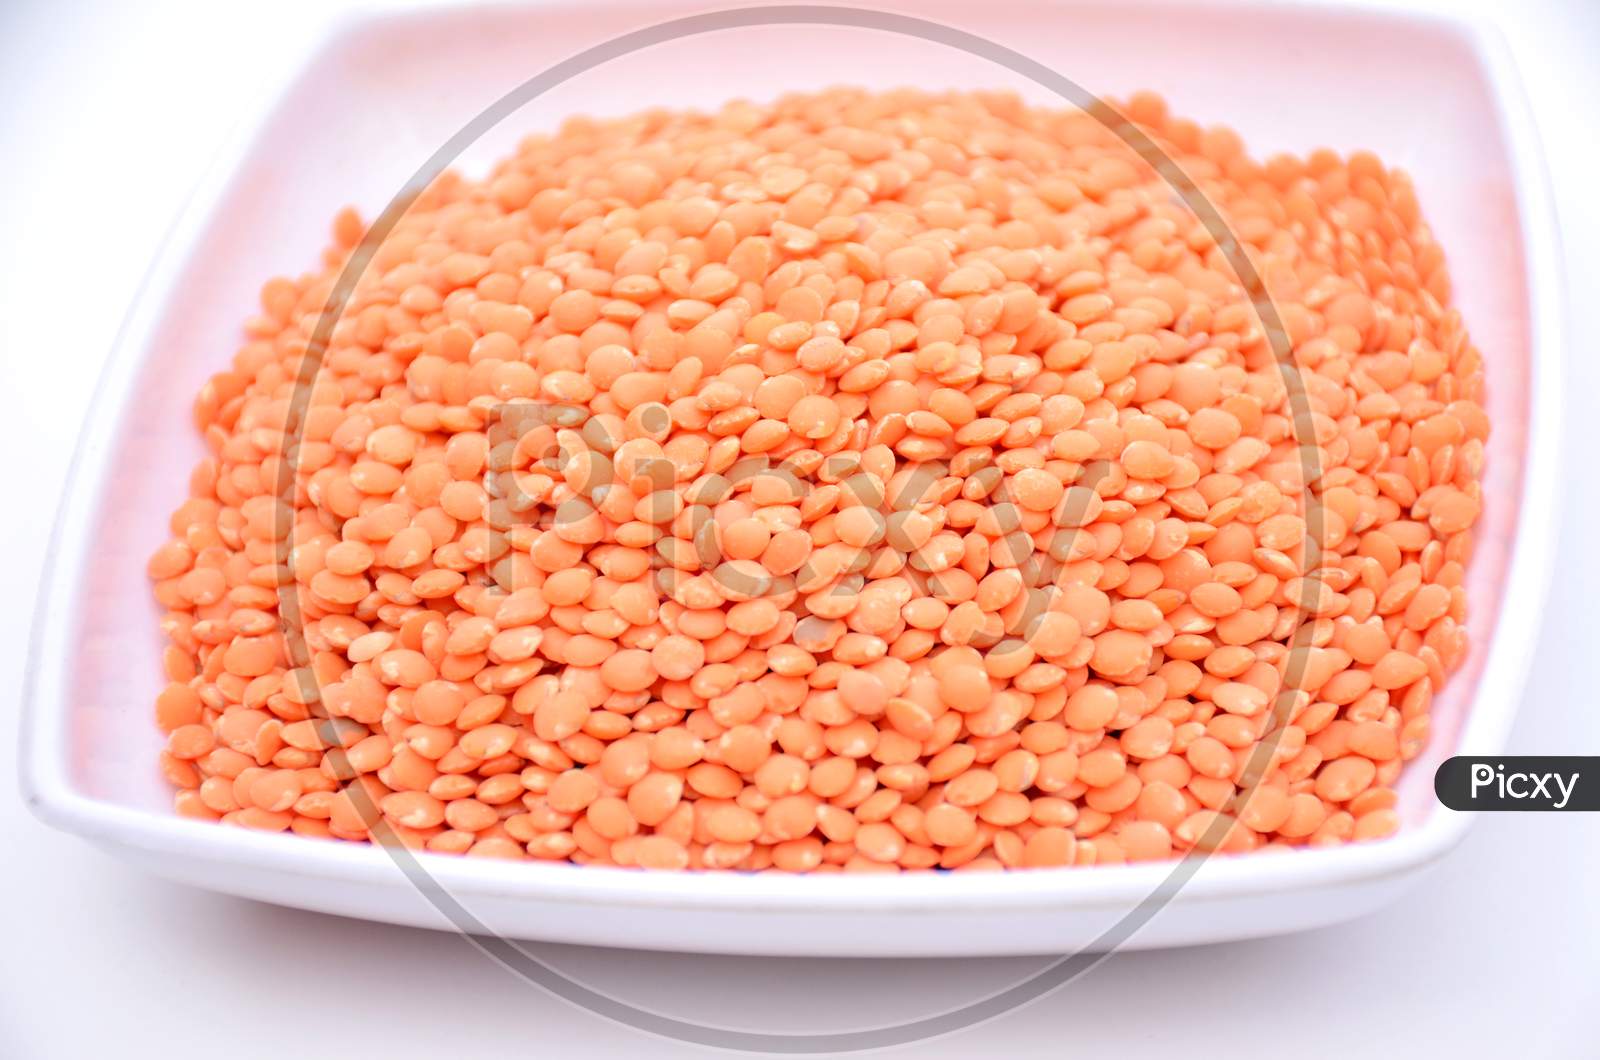 the red lentils in the white plate isolated on white background.